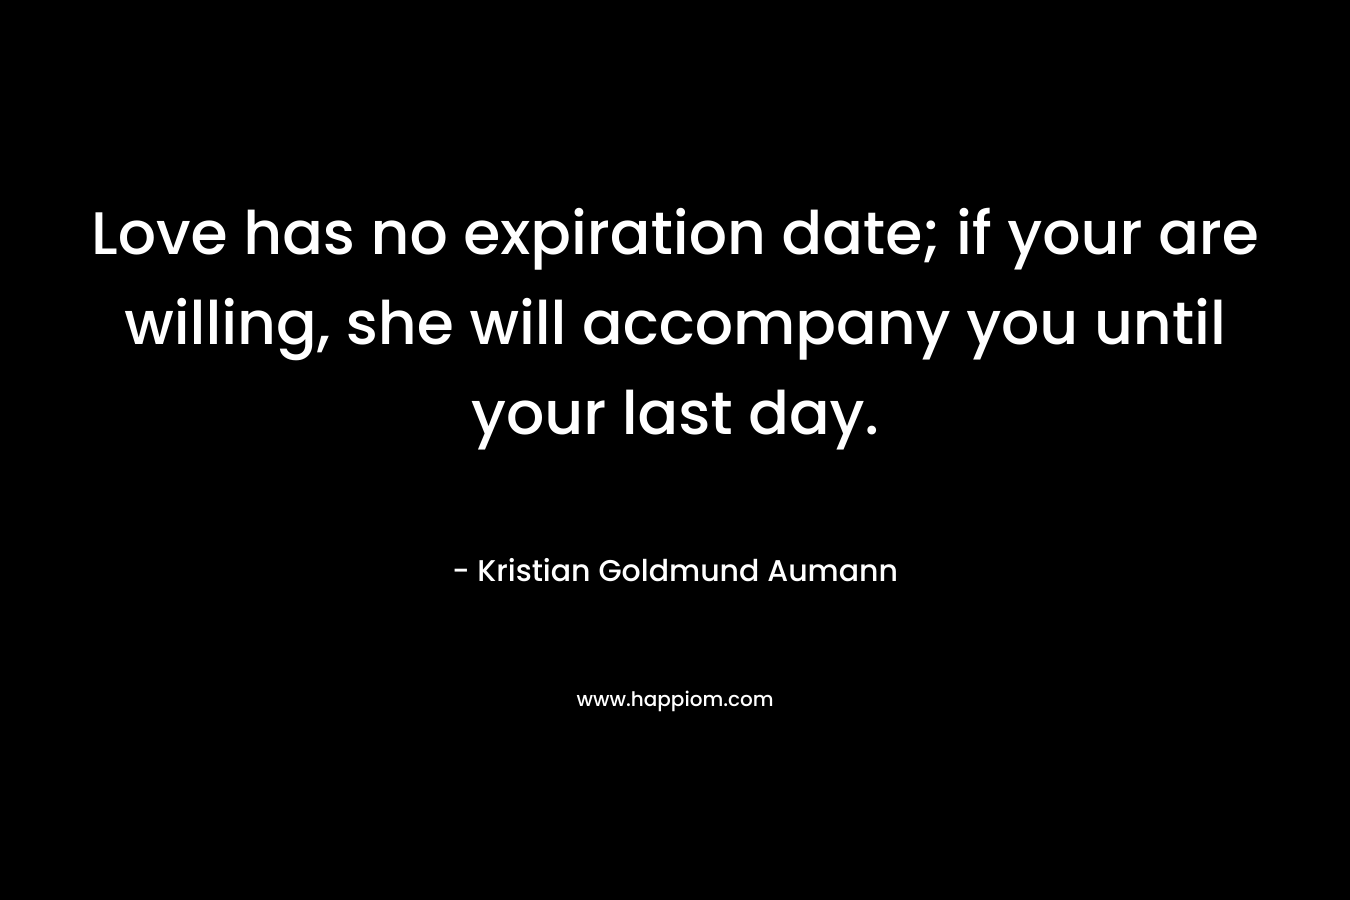 Love has no expiration date; if your are willing, she will accompany you until your last day. – Kristian Goldmund Aumann